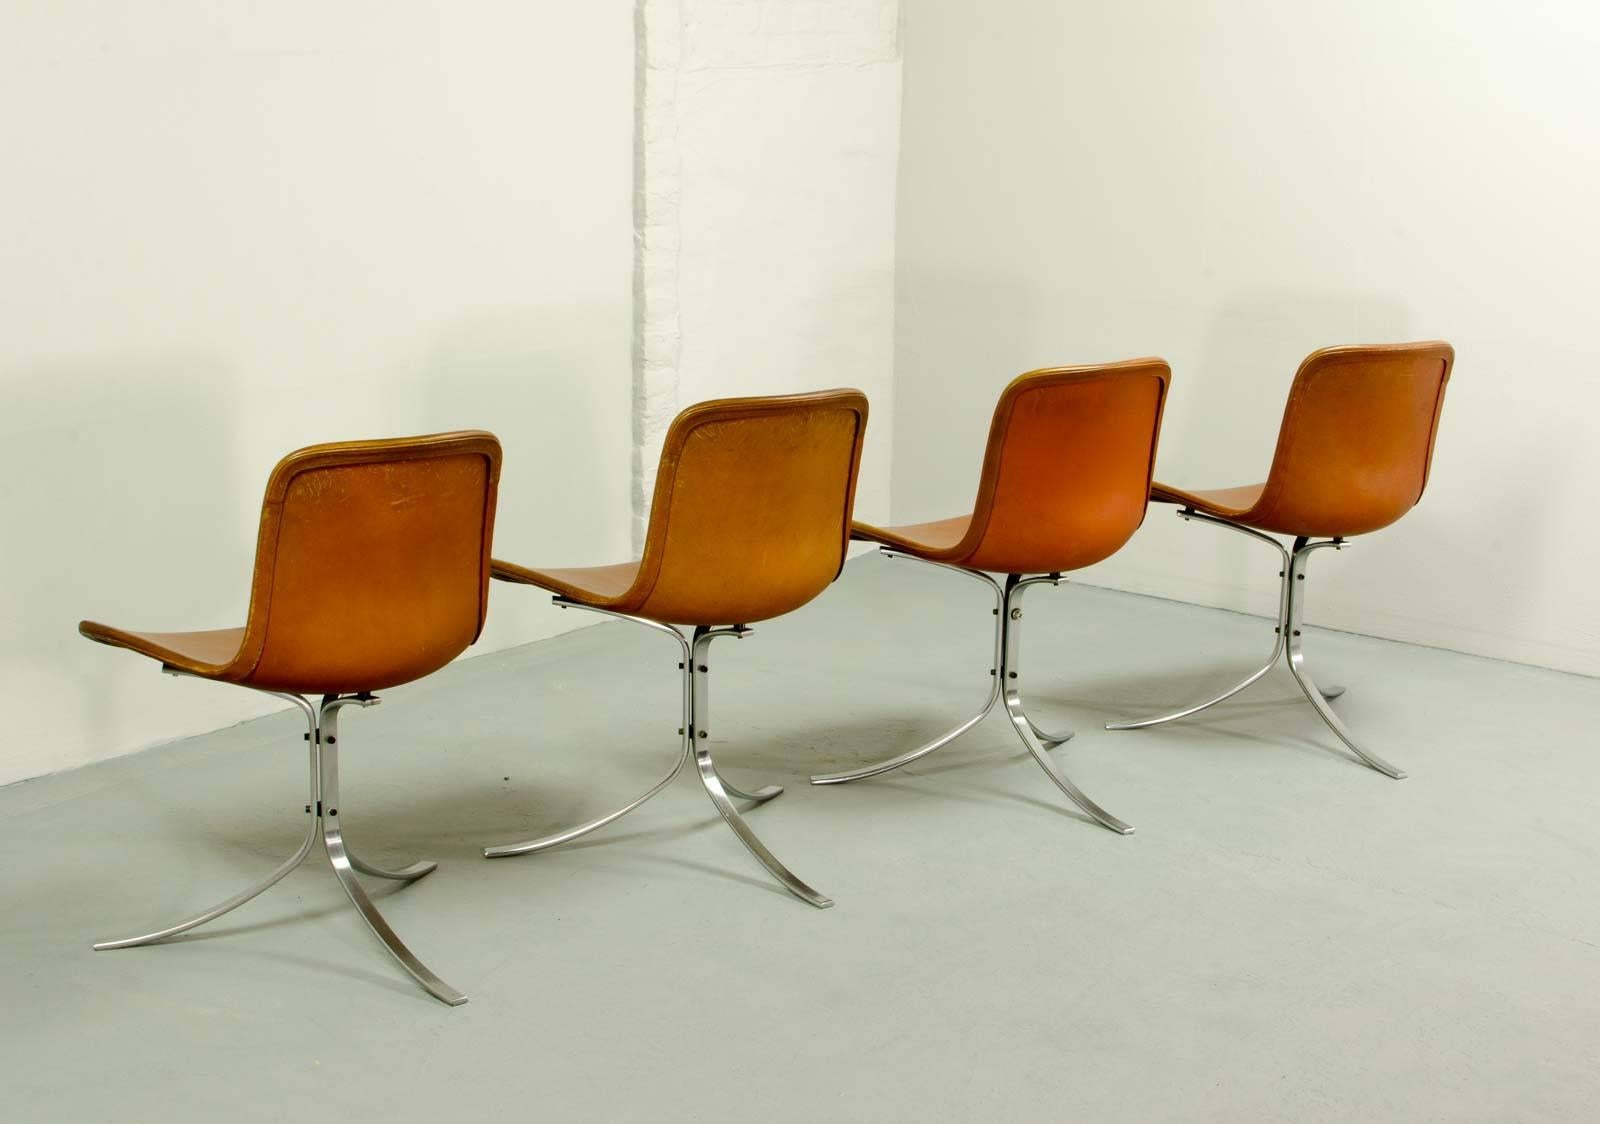 Danish Superb First Edition PK9 Dining Chairs by Poul Kjaerholm for E. Kold Christensen